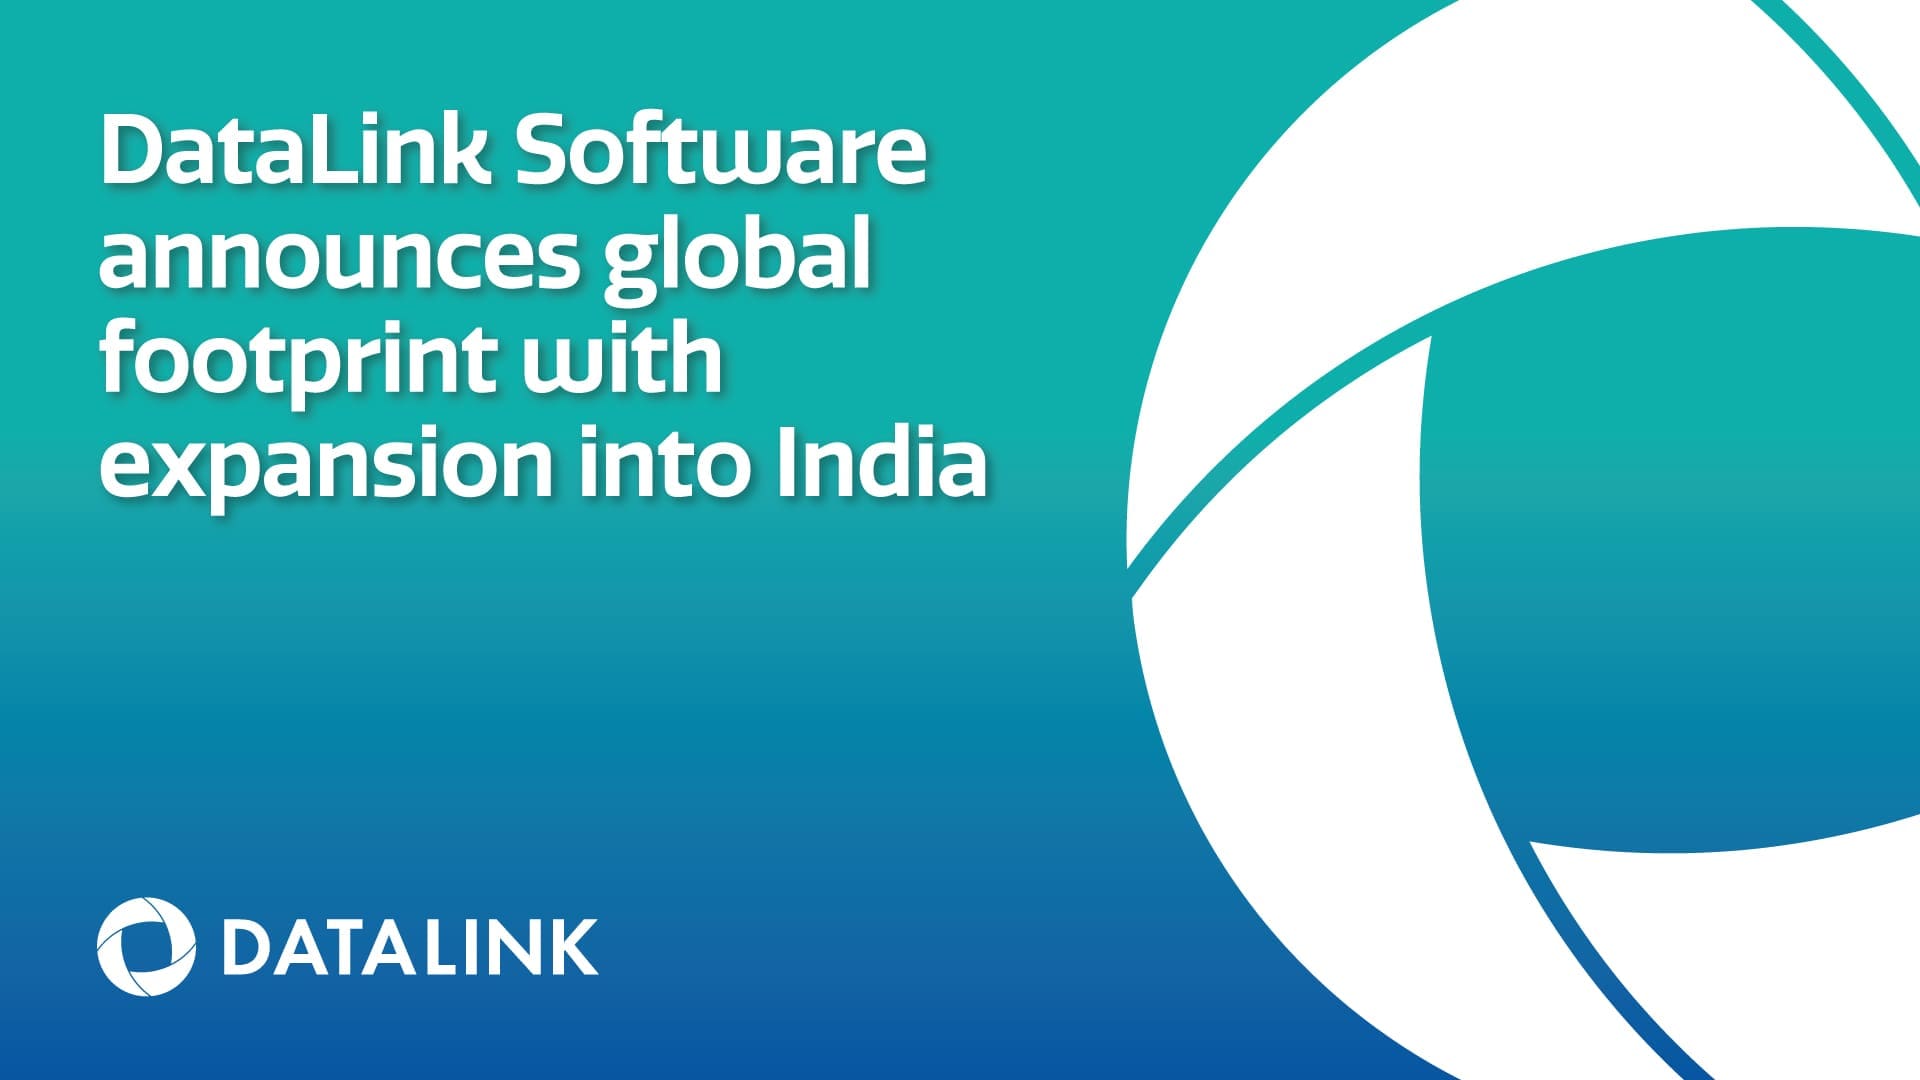 DataLink announces global footprint with expansion into India